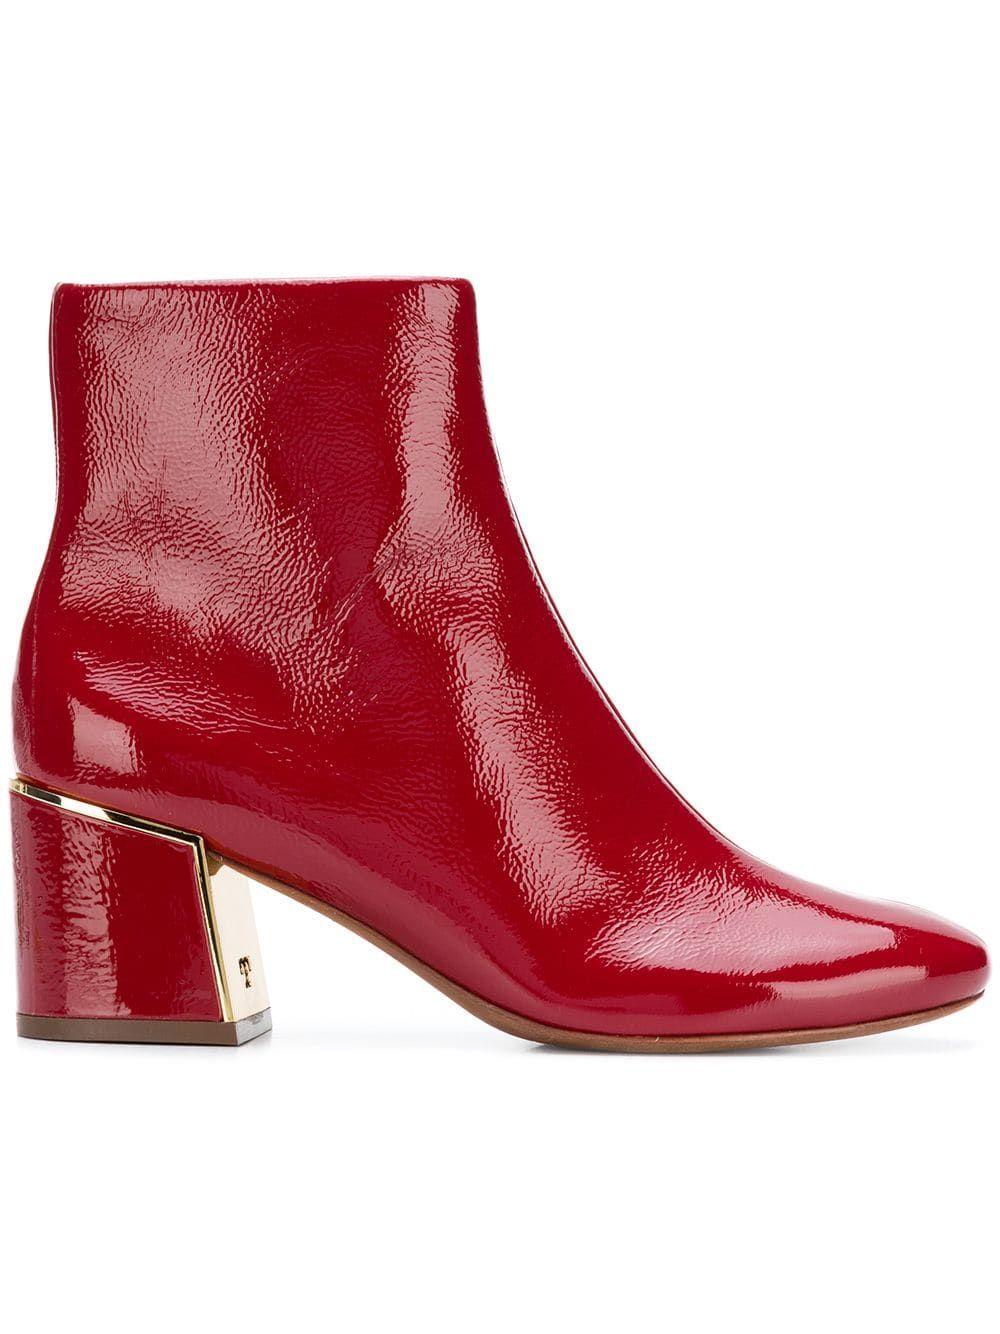 Tory Burch Burgundy Leather Ankle Boots in Red - Lyst